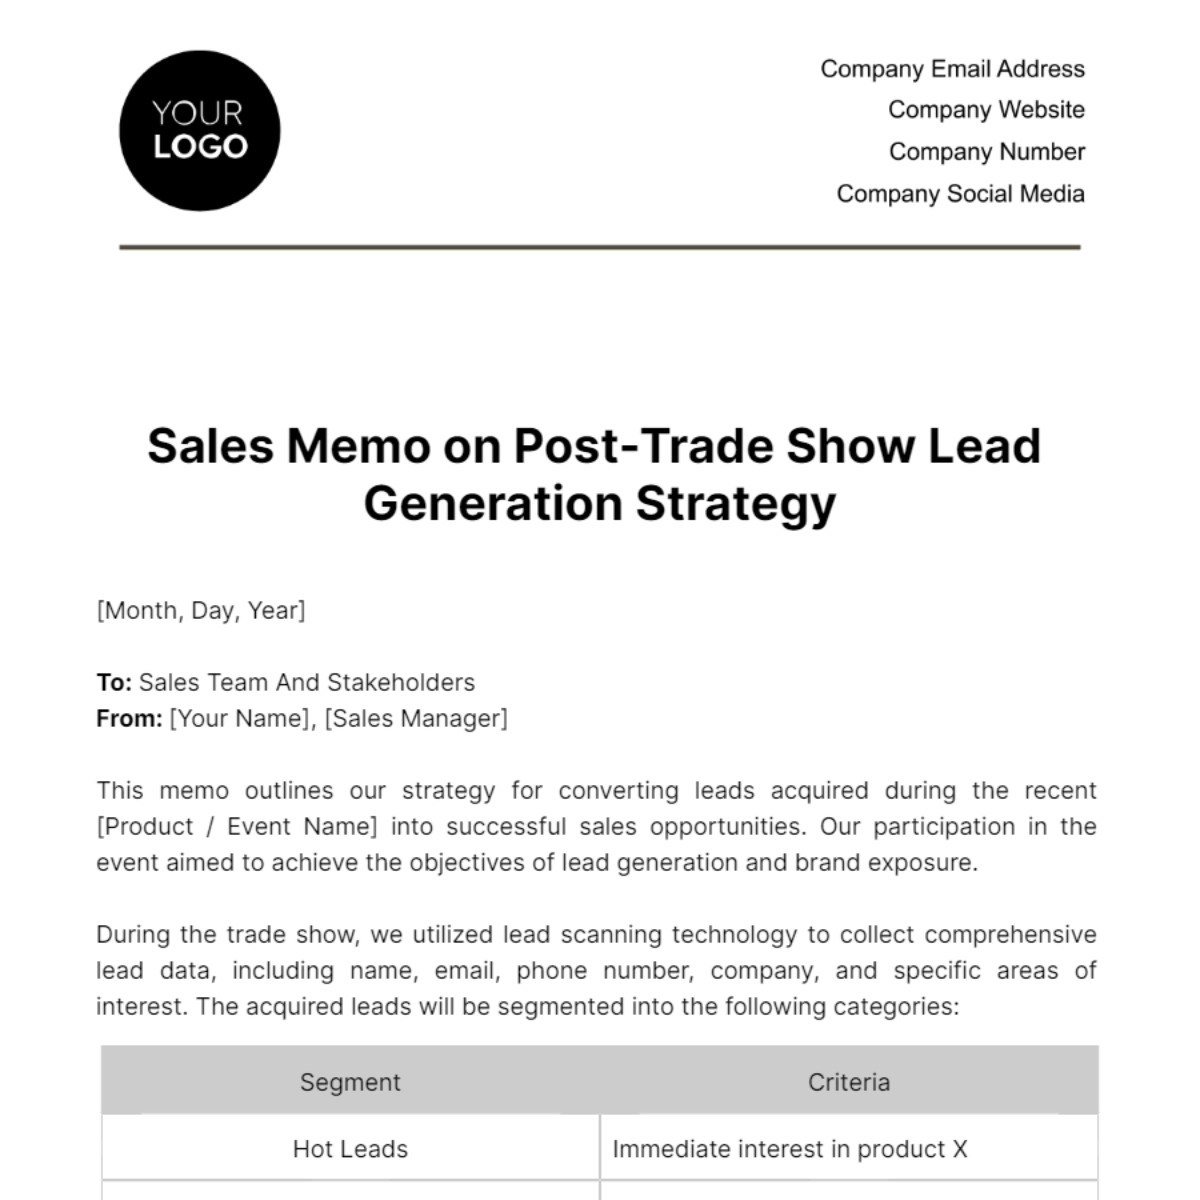 Free Sales Memo on Post-Trade Show Lead Generation Strategy Template